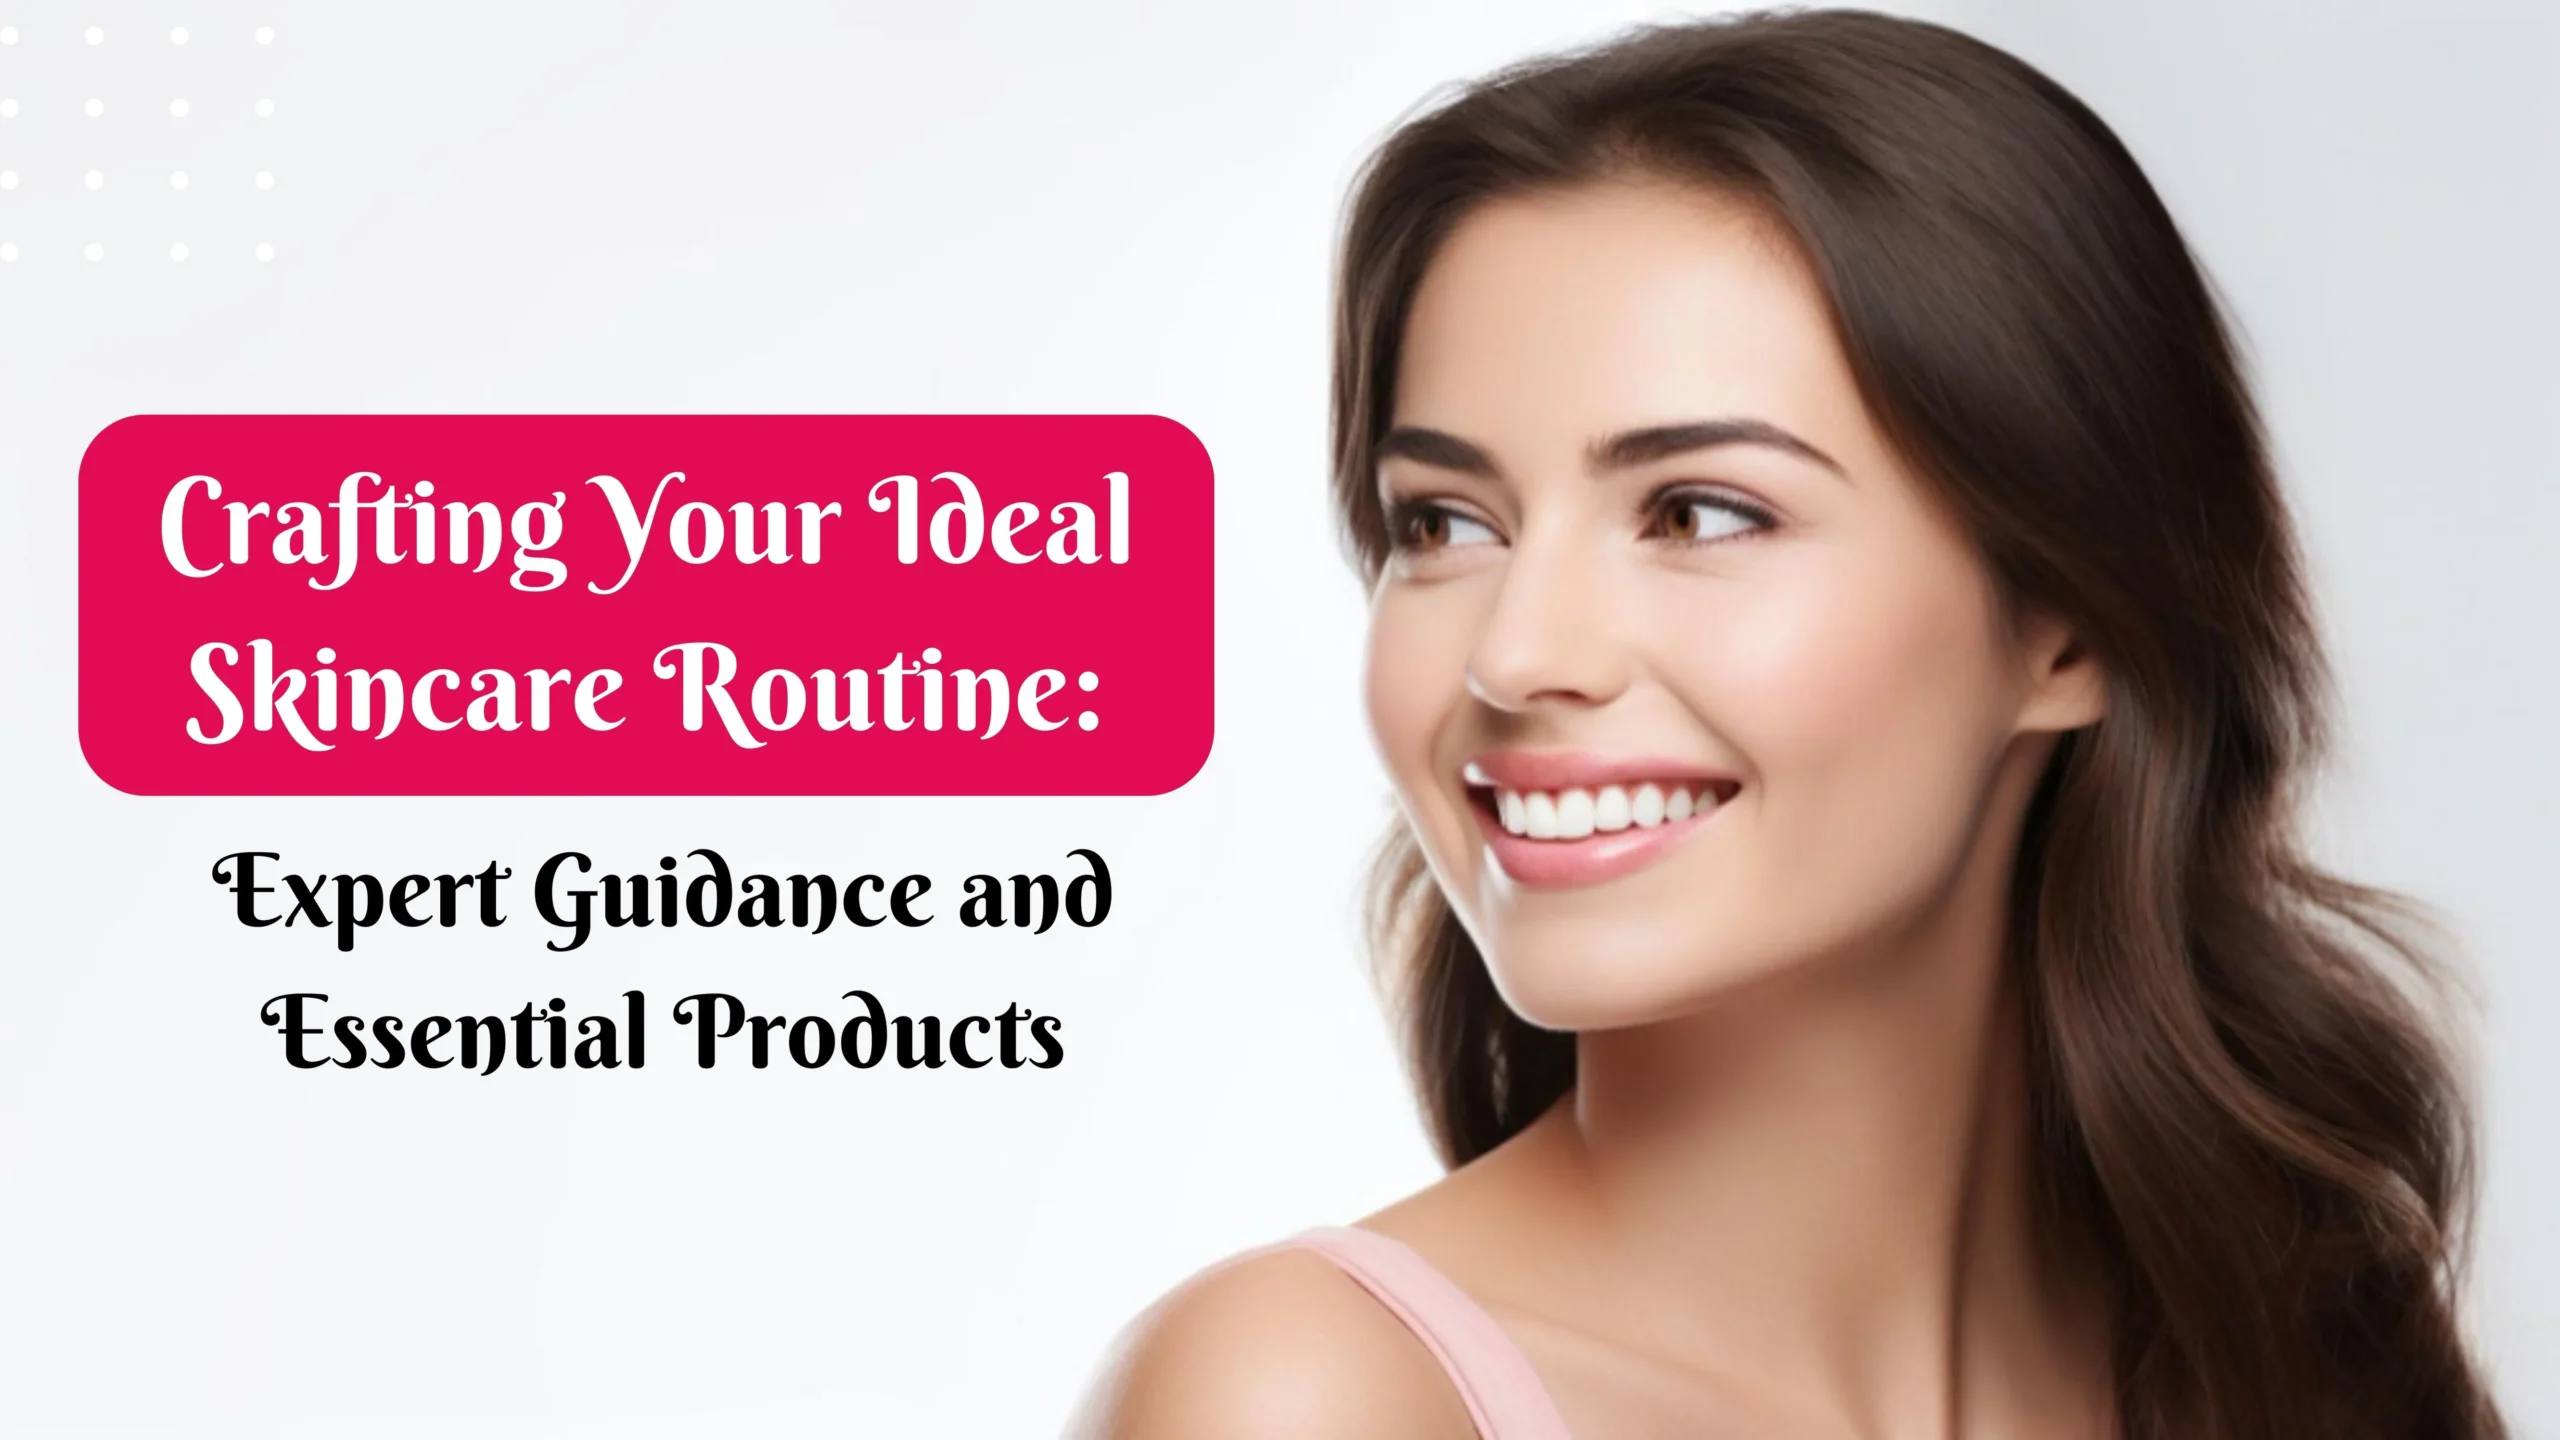 Crafting Your Ideal Skincare Routine: Expert Guidance and Essential Products